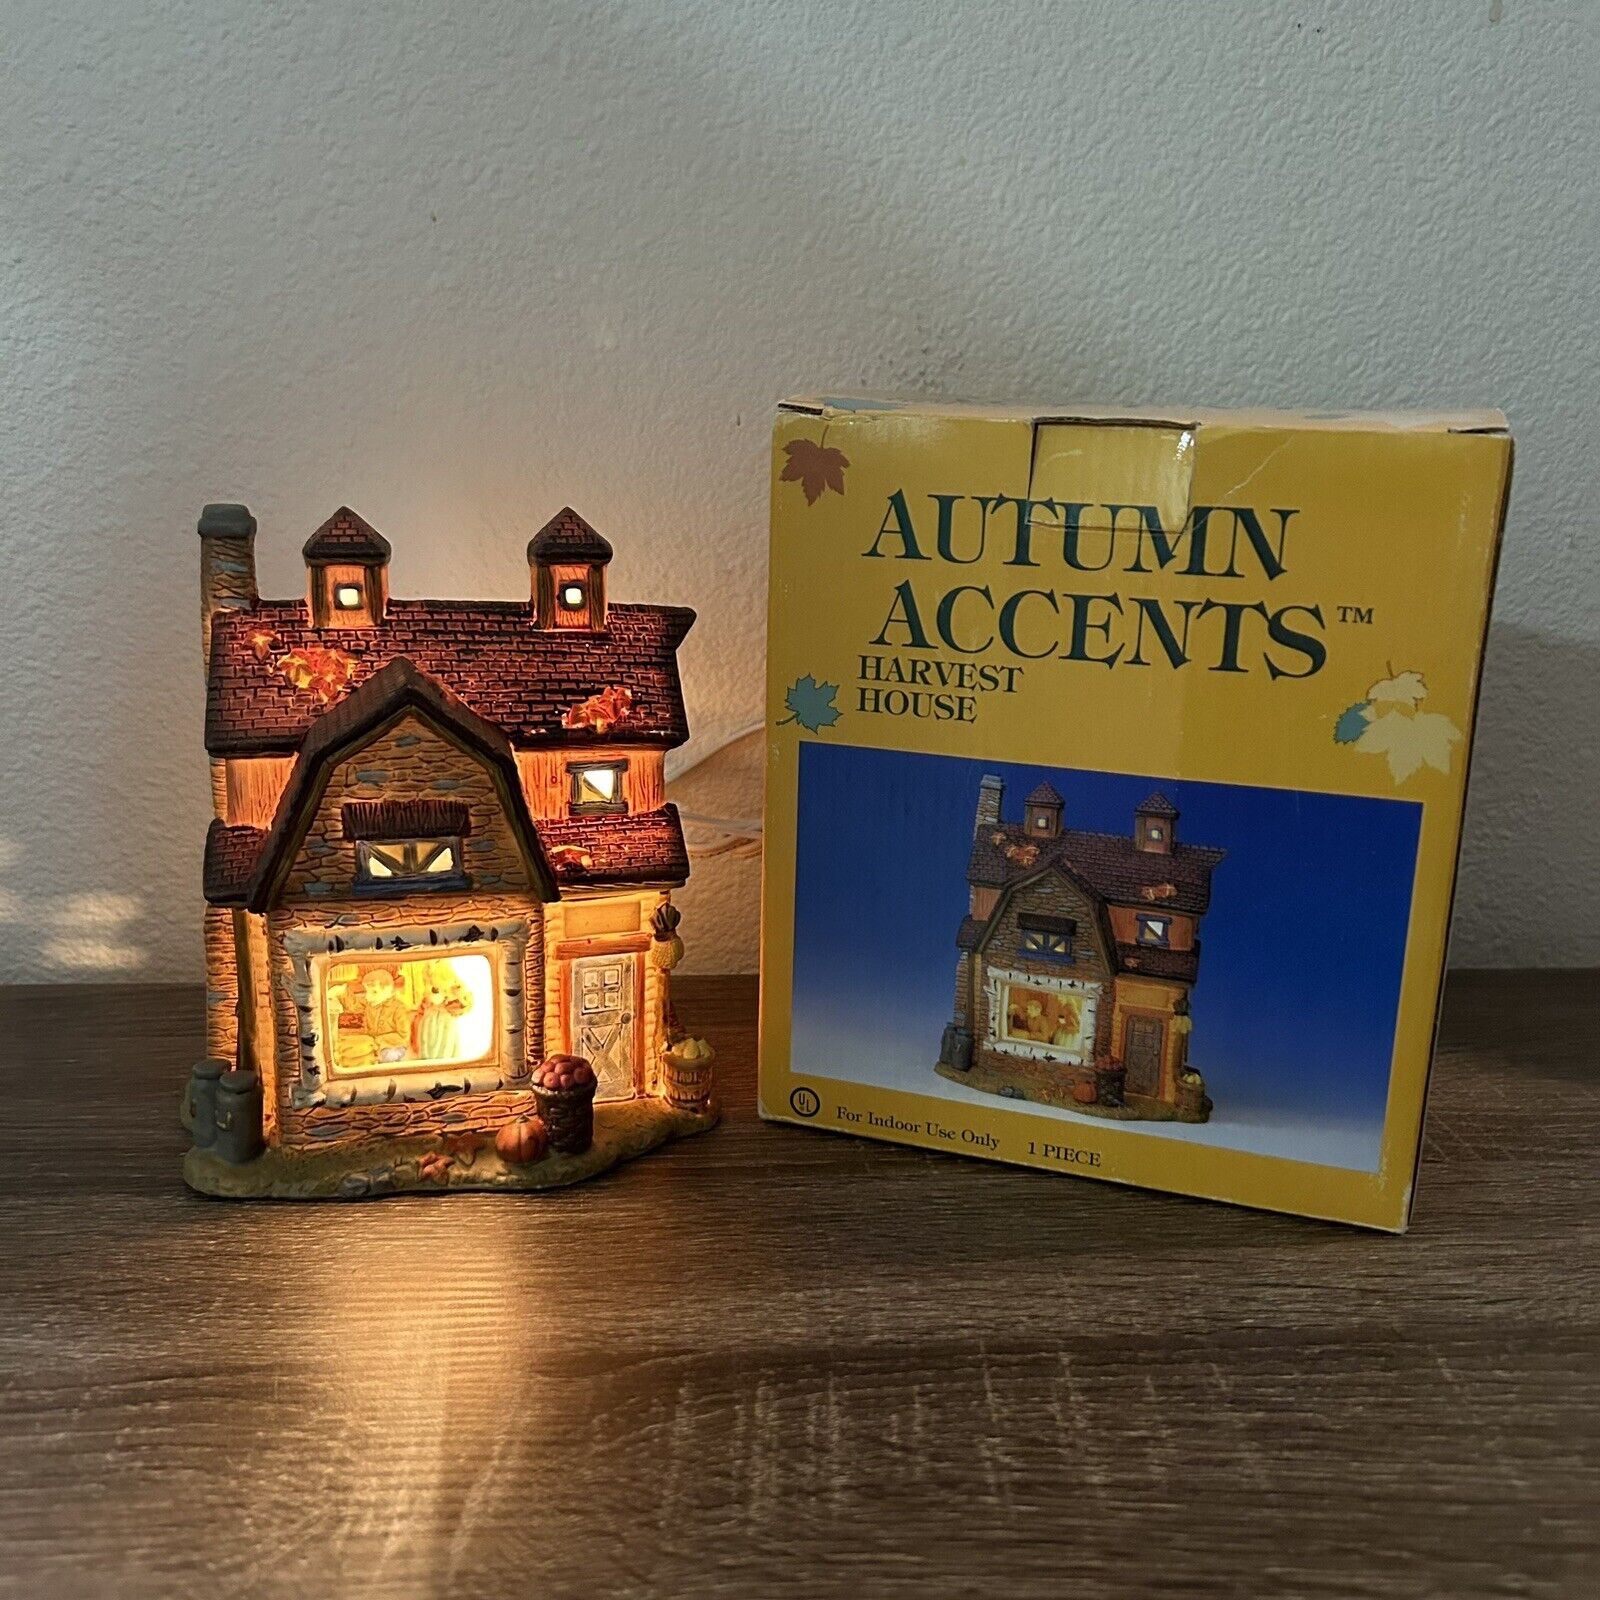 Vintage Lighted Porcelain Harvest House 2000 by Autumn Accents In Box